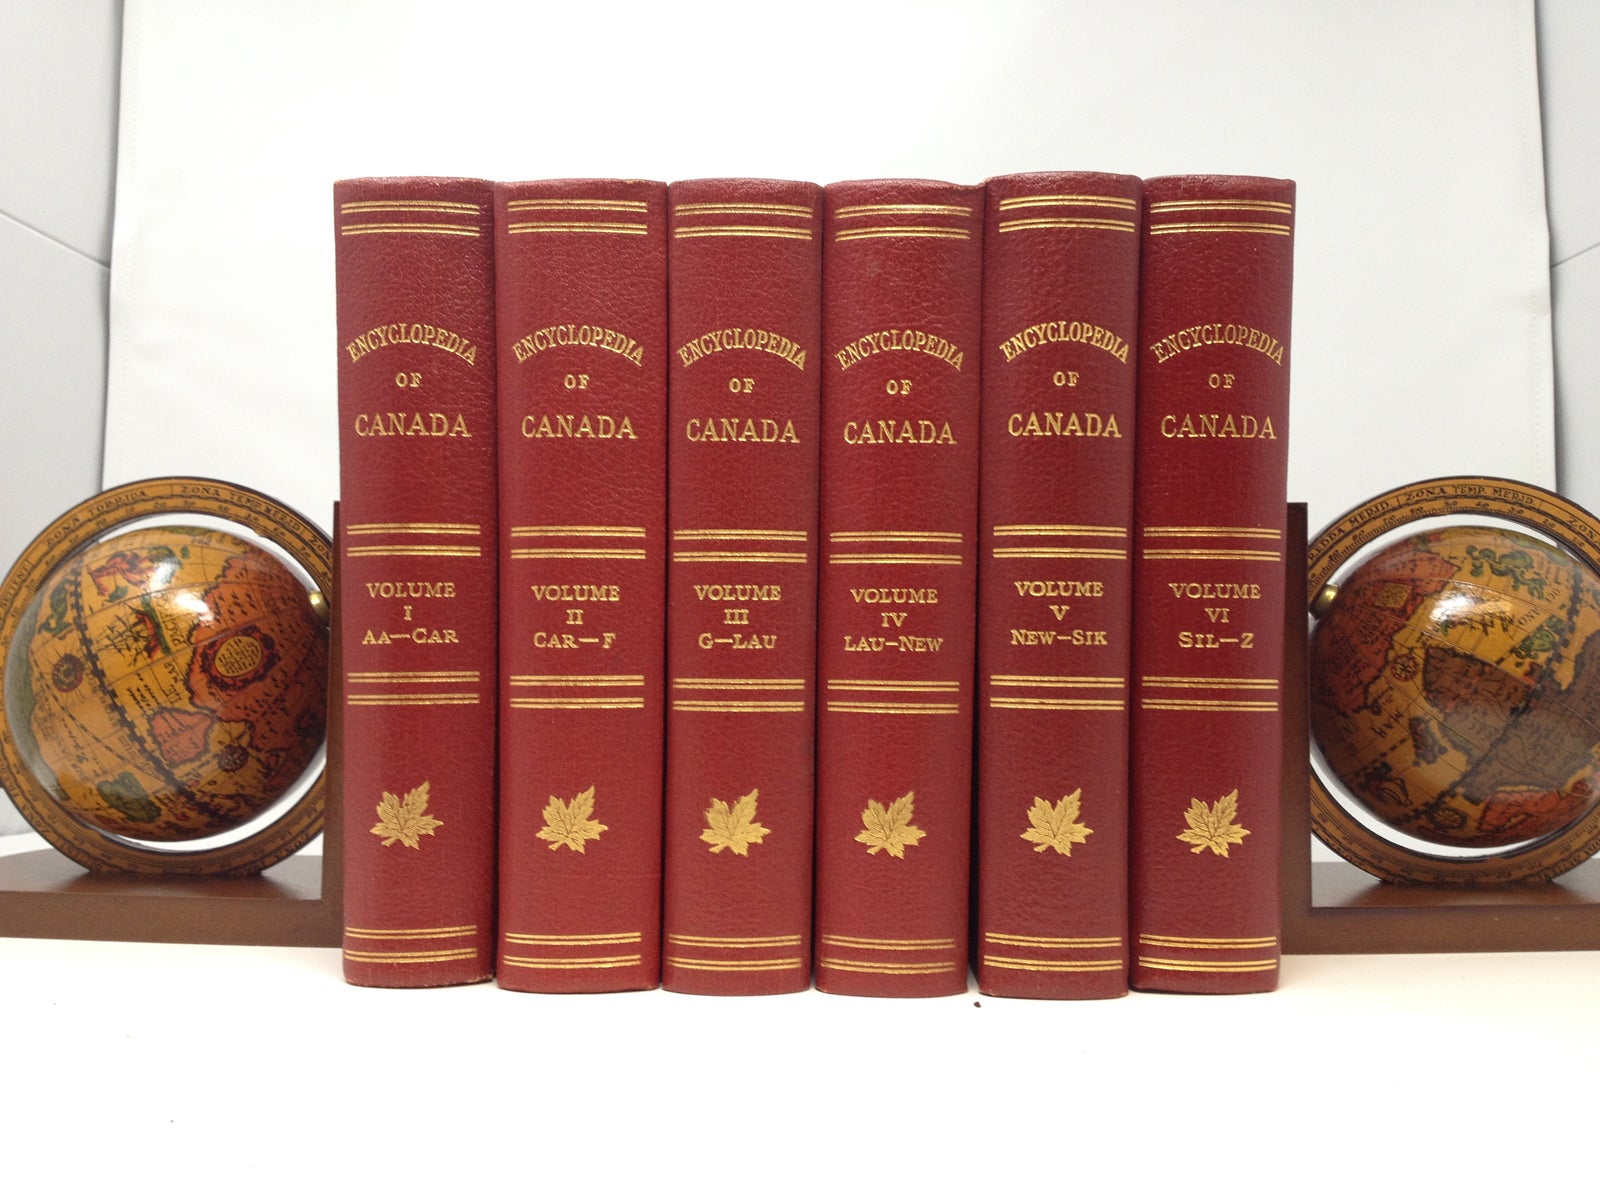 Wallace, W. Stewart - Encyclopedia of Canada (Six Volumes, Complete)